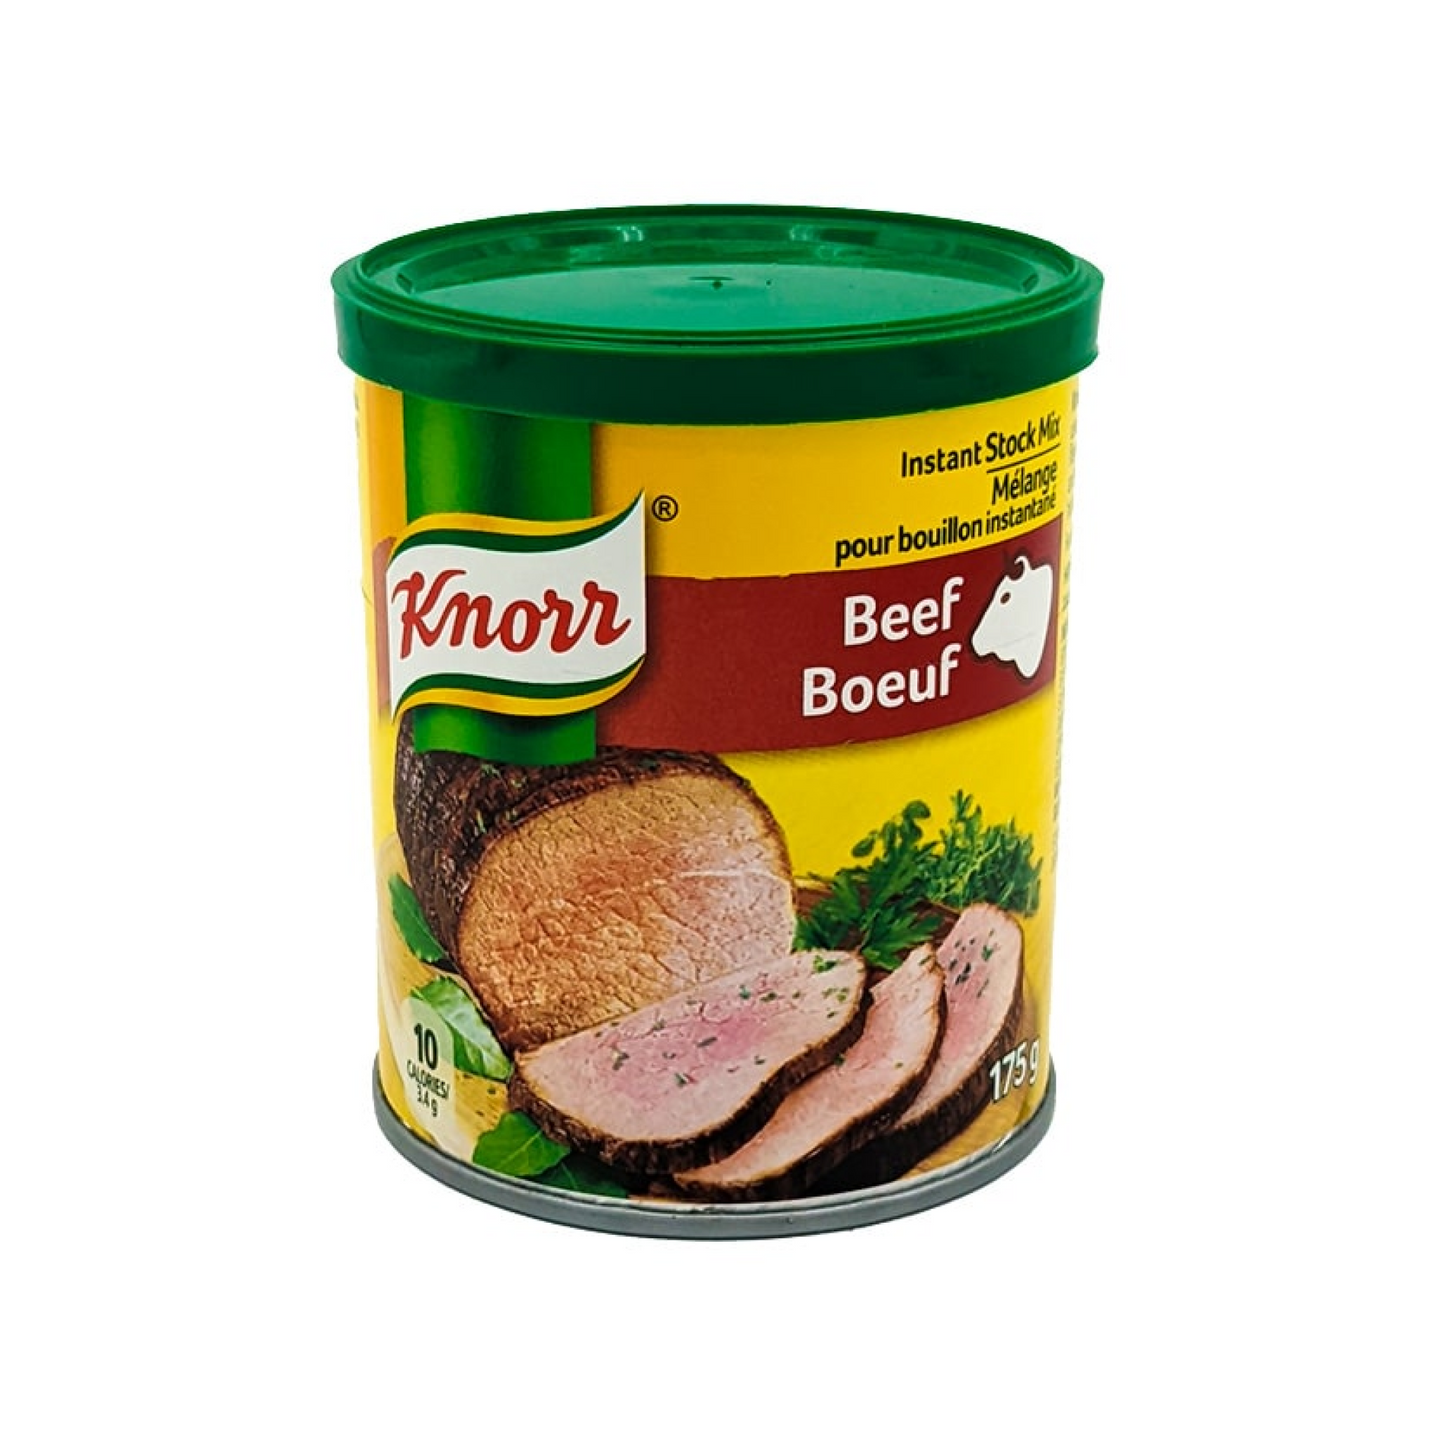 Knorr Beef instant Stock Mix 175g